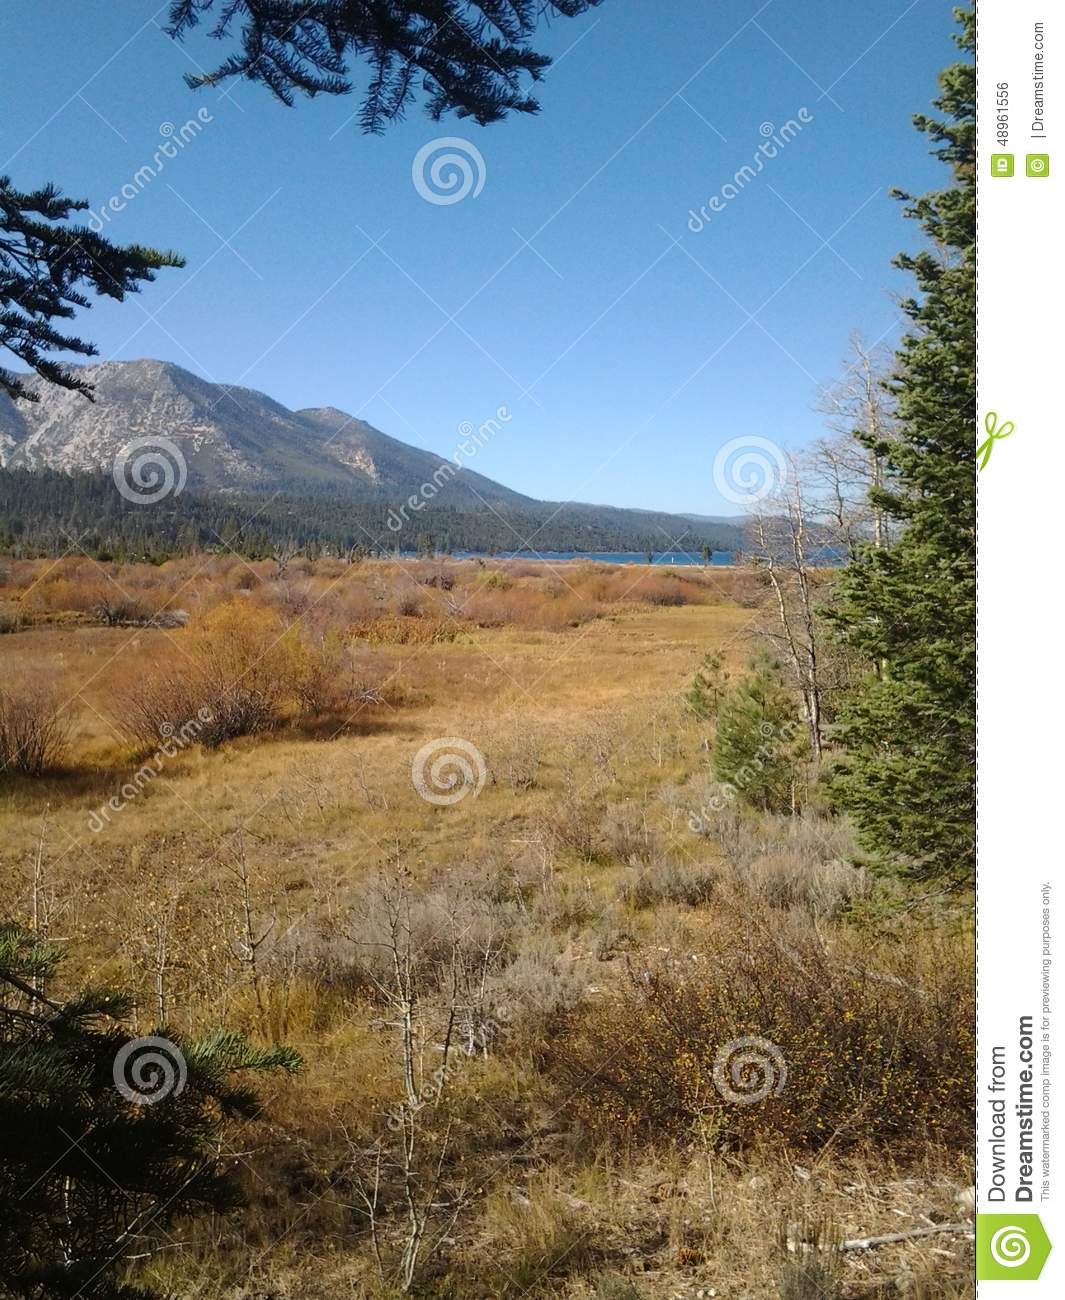 Plains And Mountains Clipart.